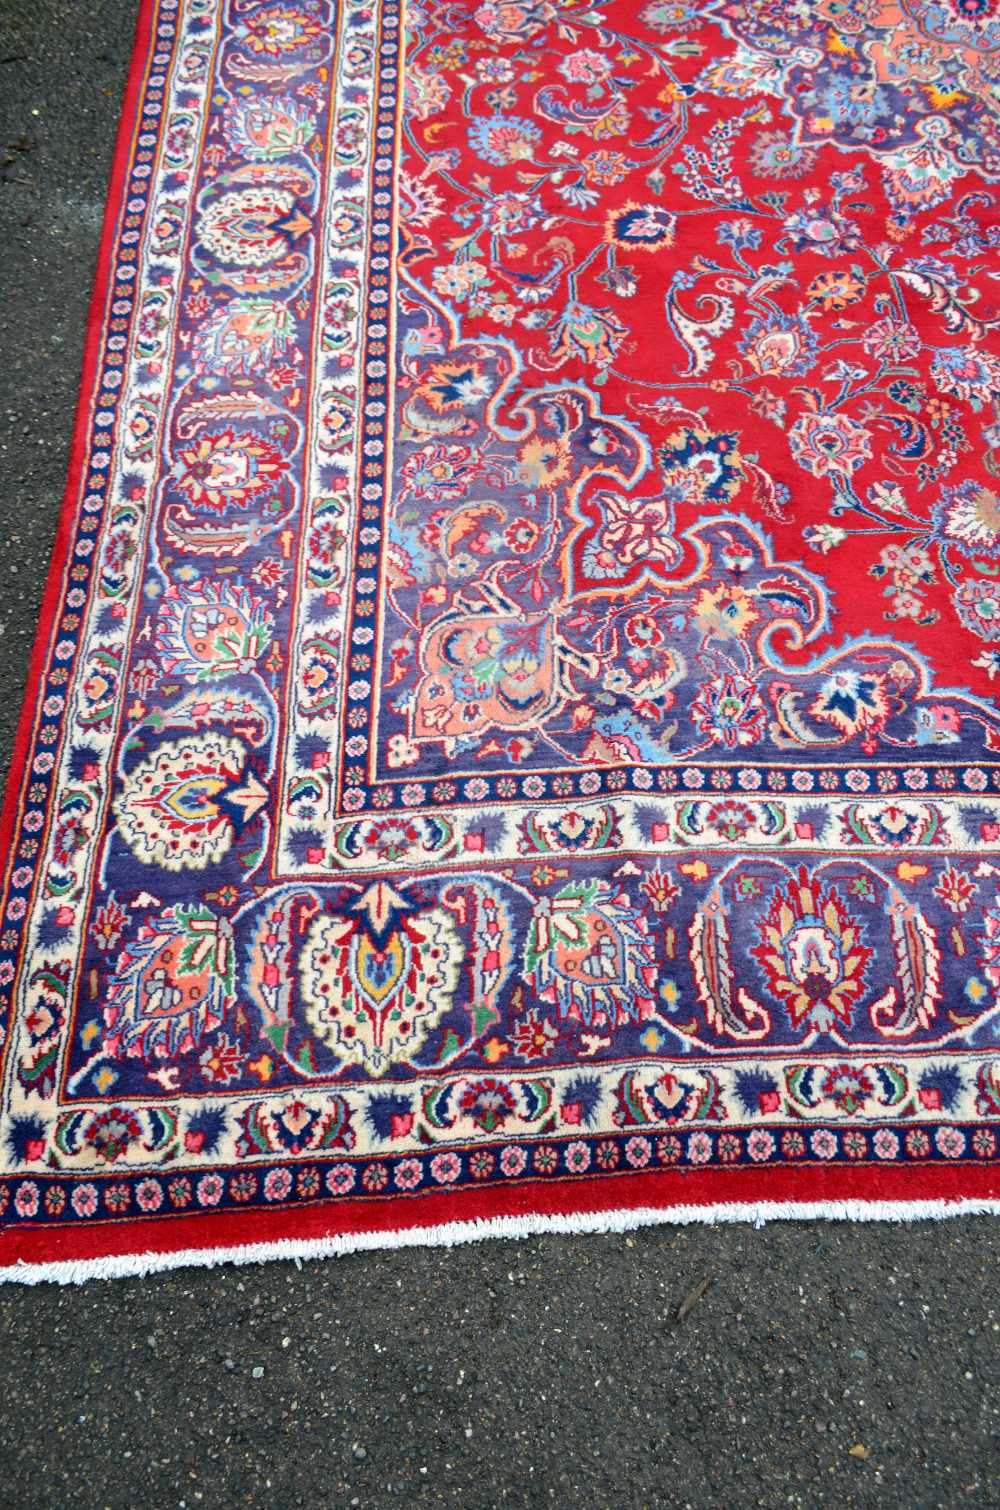 Hand woven persian Tabriz carpet, 100% wool, with multi-coloured design - Image 2 of 7